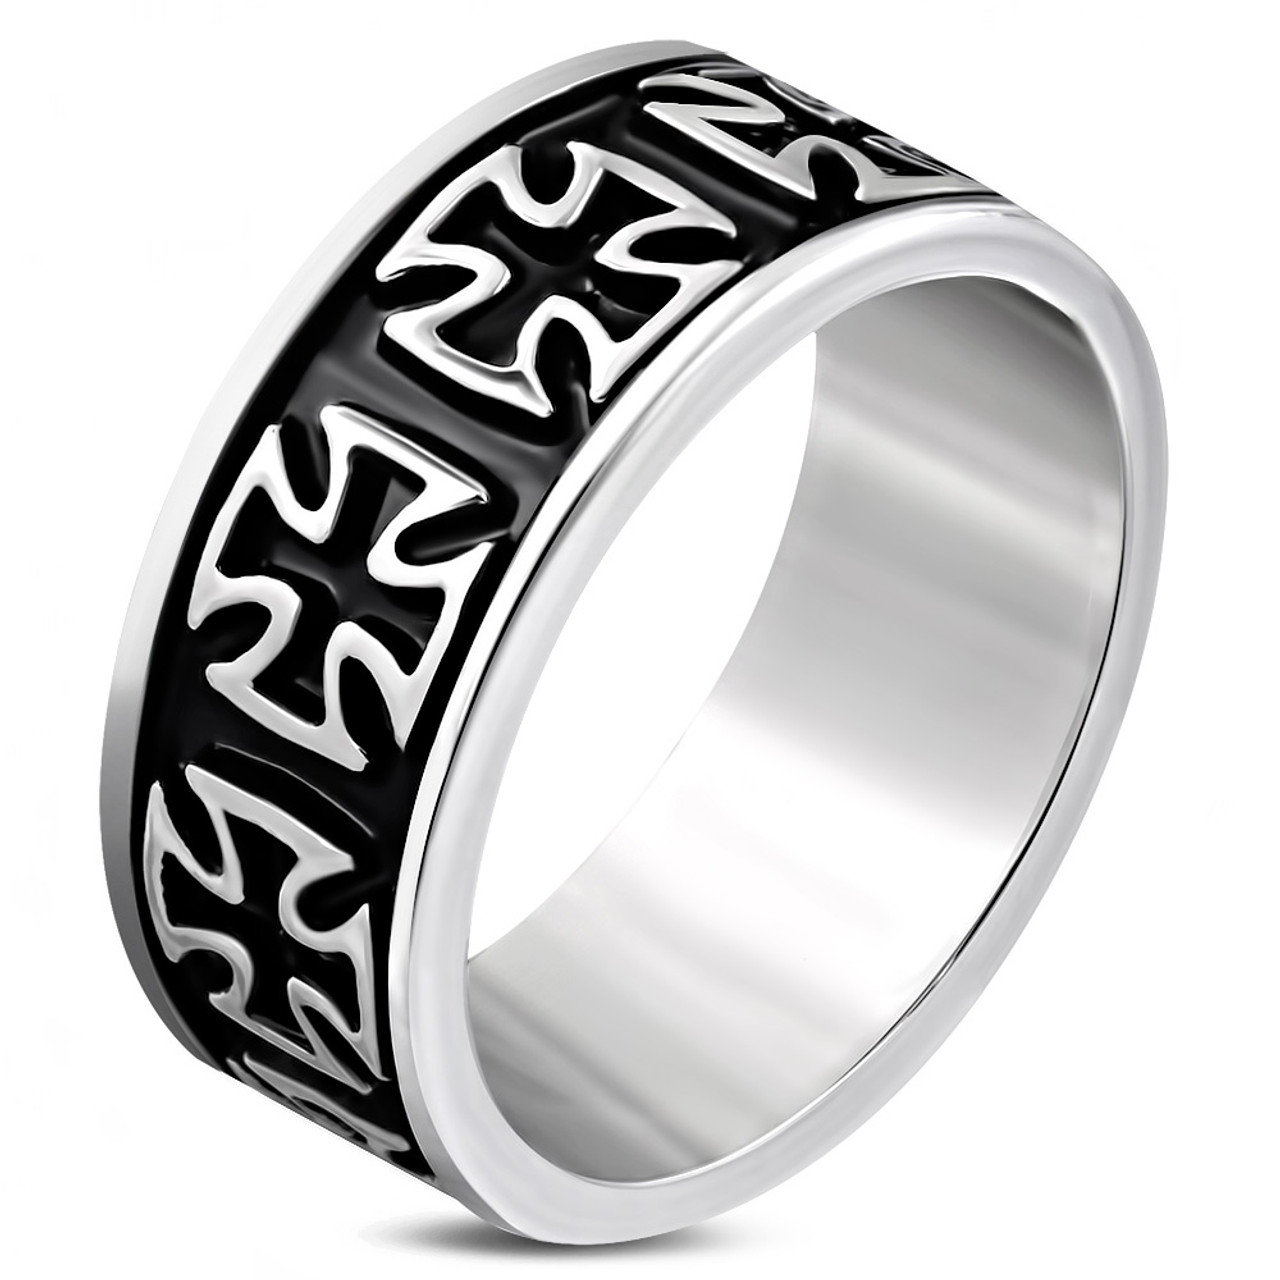 Personalized Stainless Steel 2-Tone Pattee Cross Biker Band Ring ...